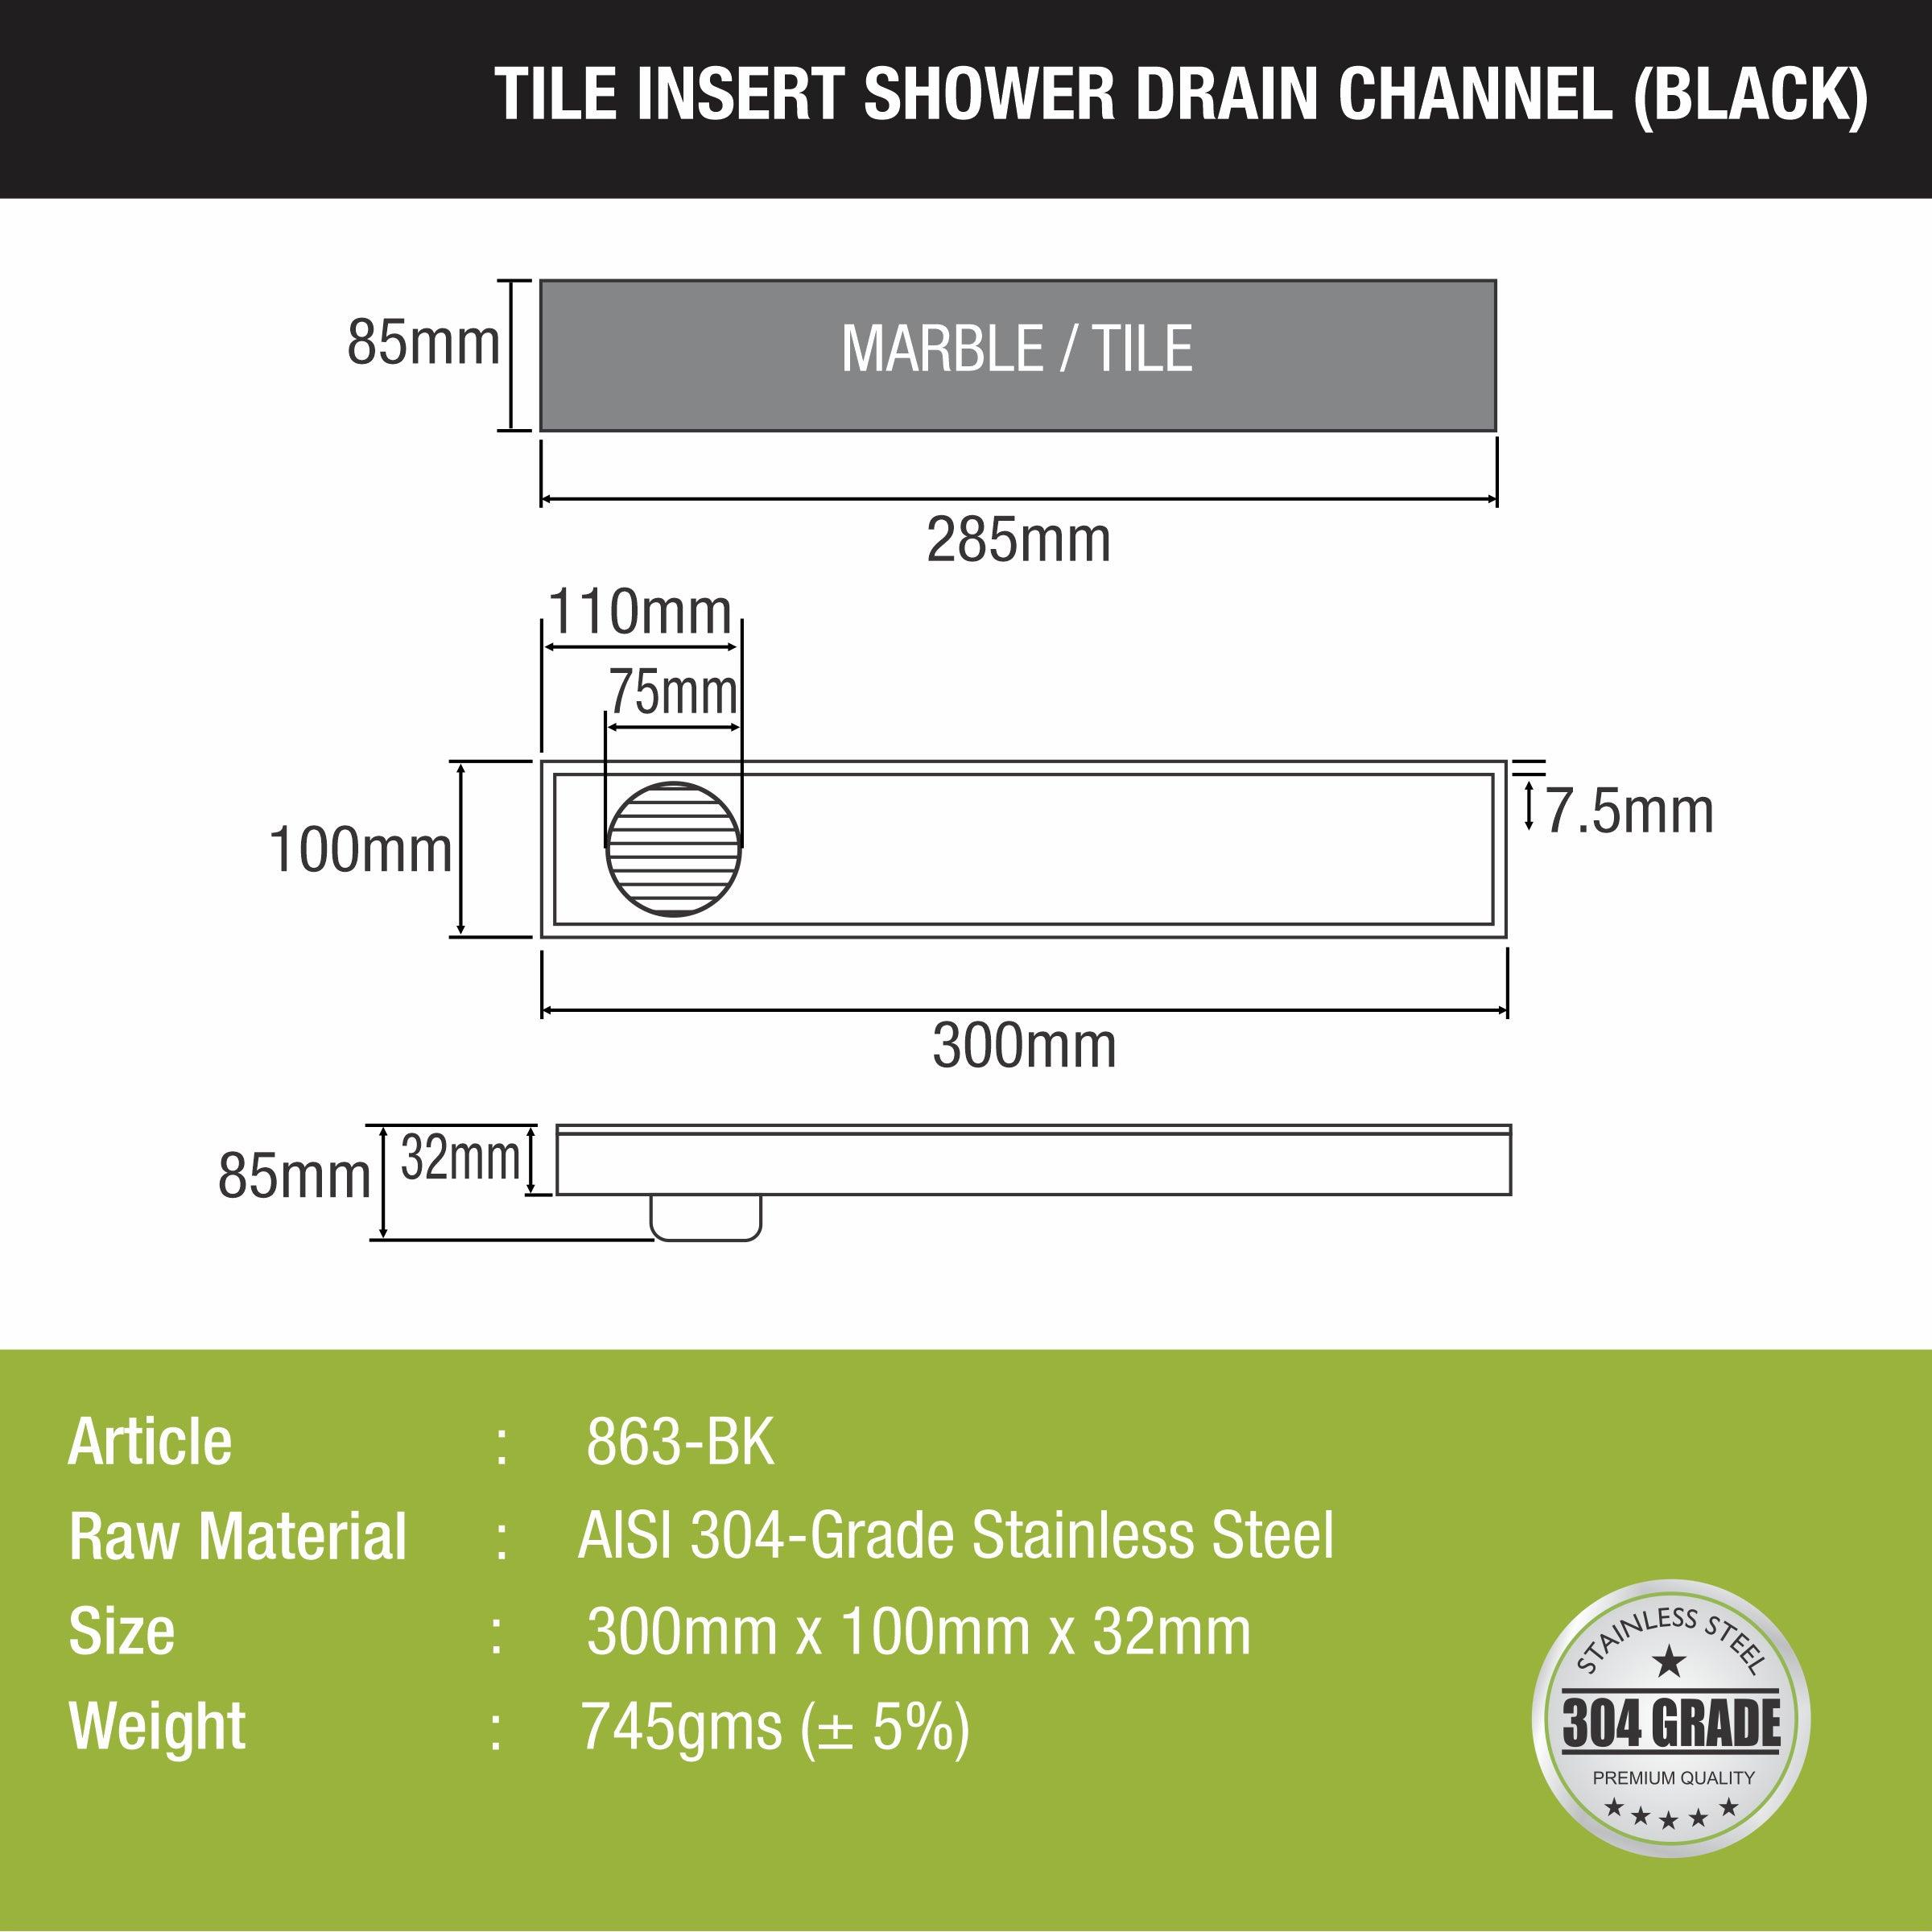 Tile Insert Shower Drain Channel - Black (12 x 5 Inches) size and measurement